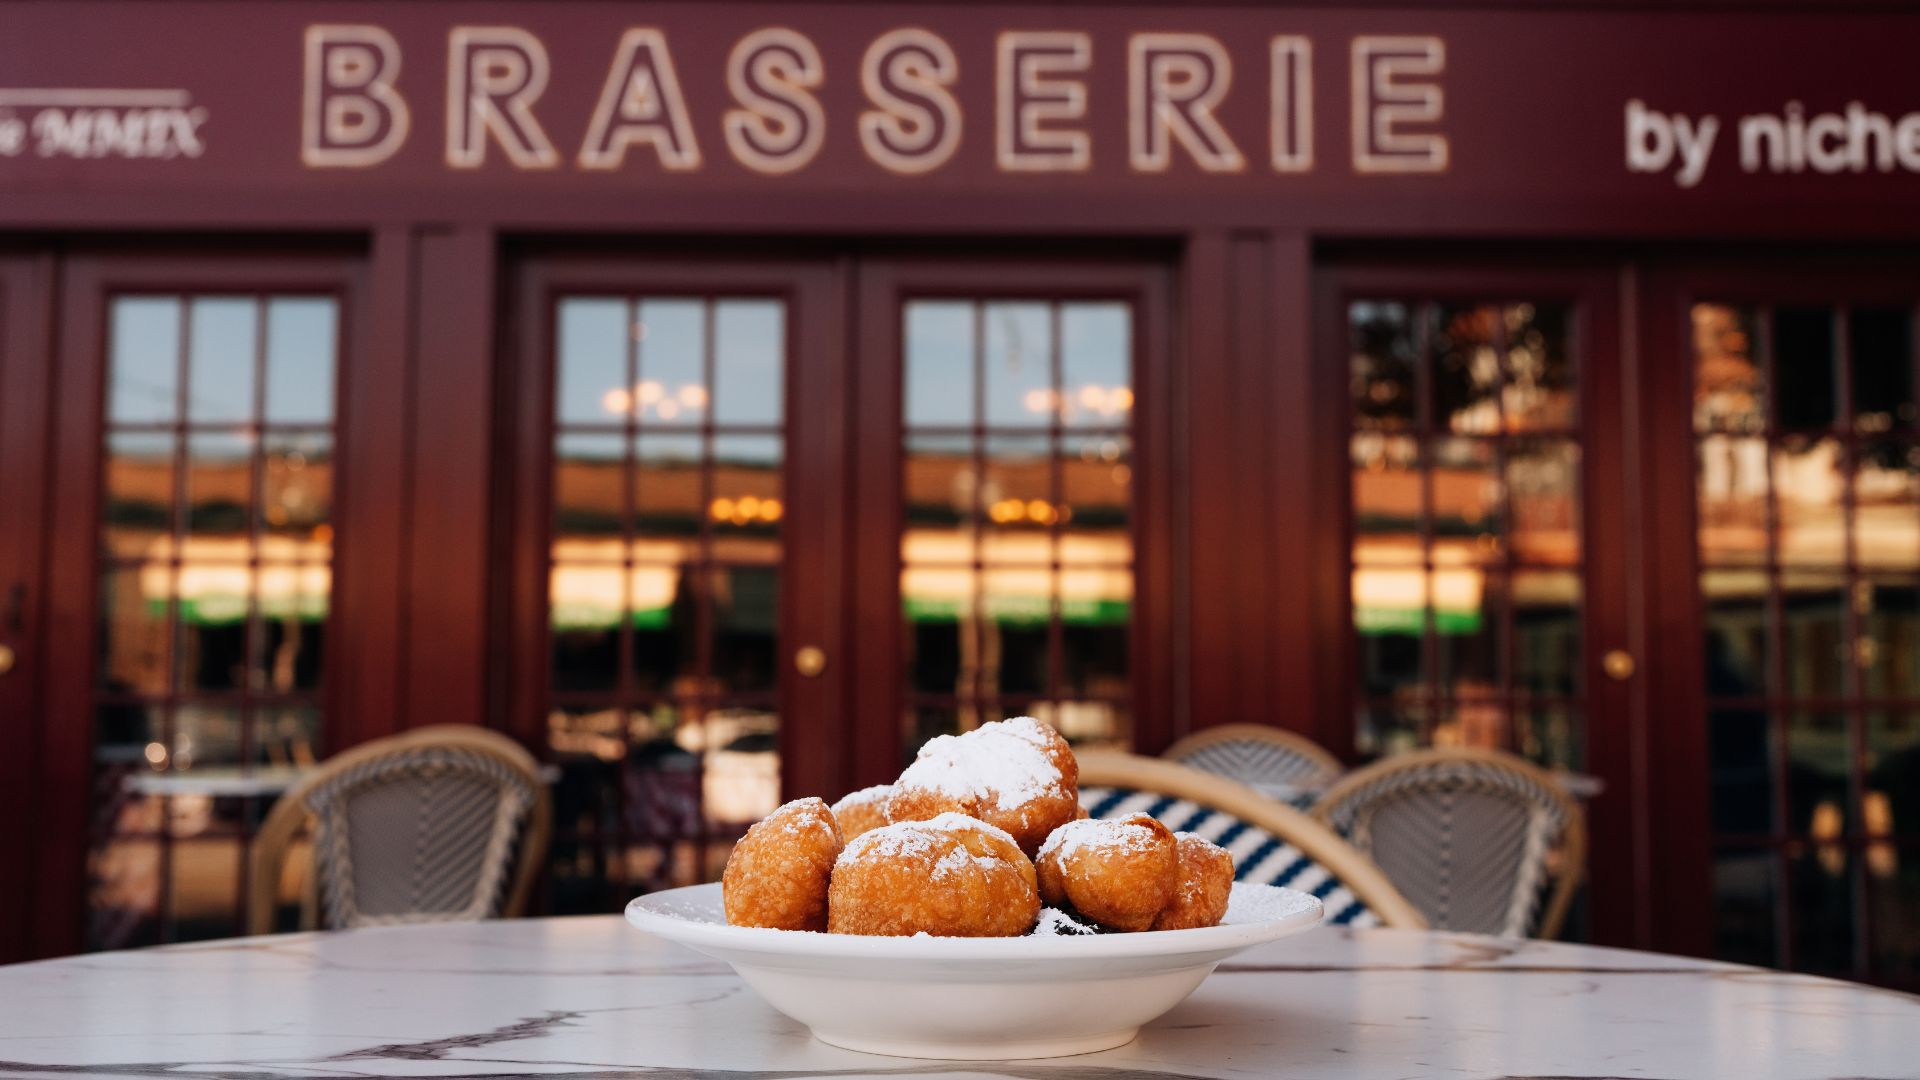 Beignets sit on a table on the patio at Brasserie by Niche.